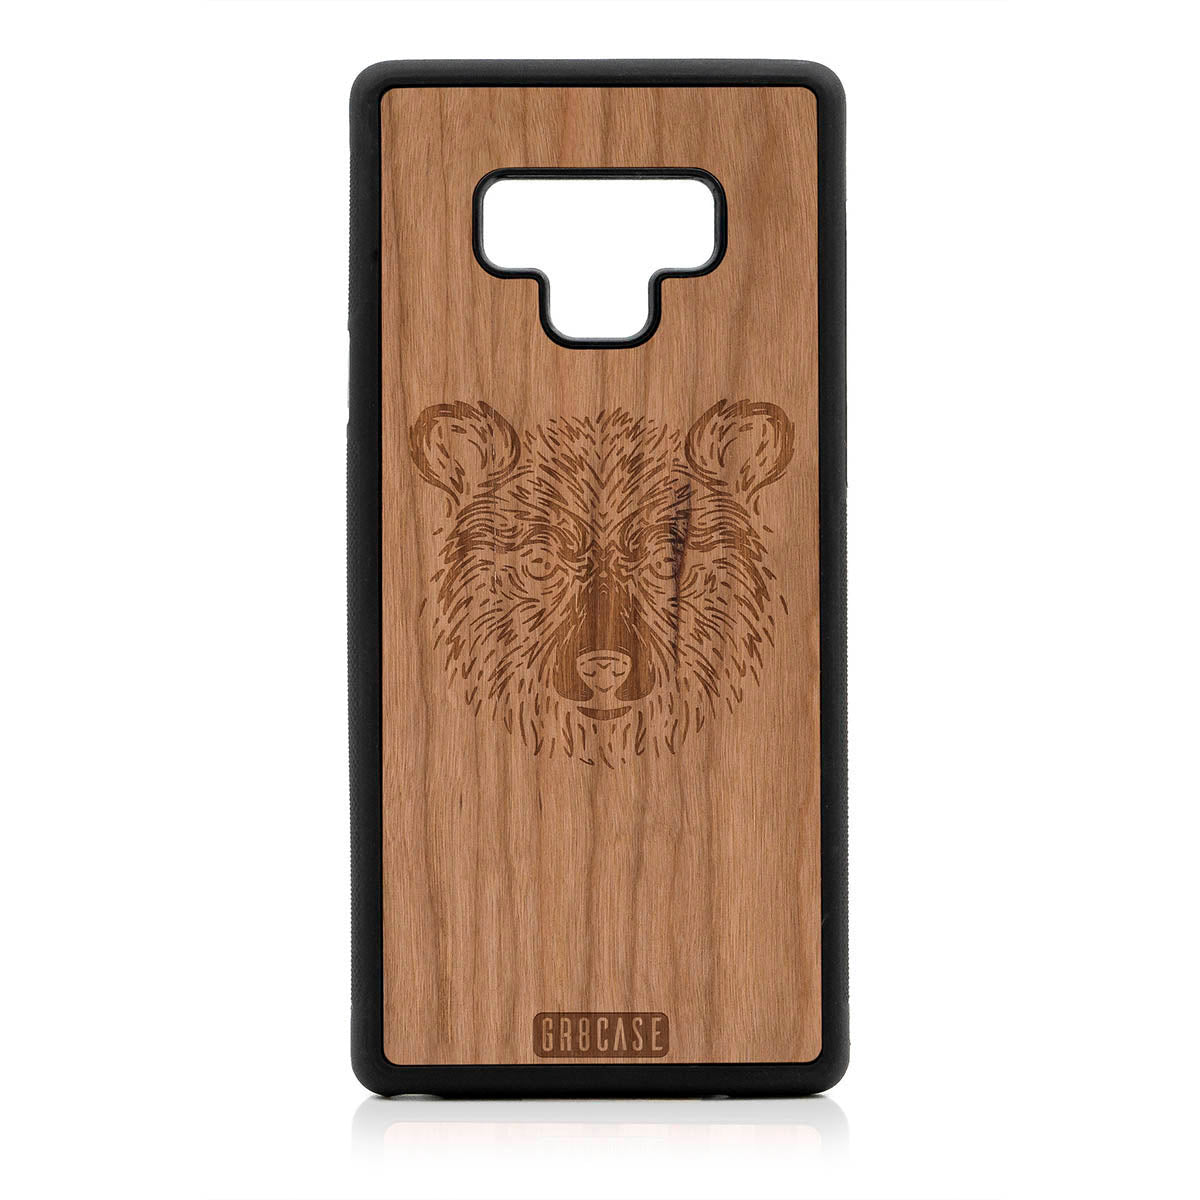 Furry Bear Design Wood Case For Samsung Galaxy Note 9